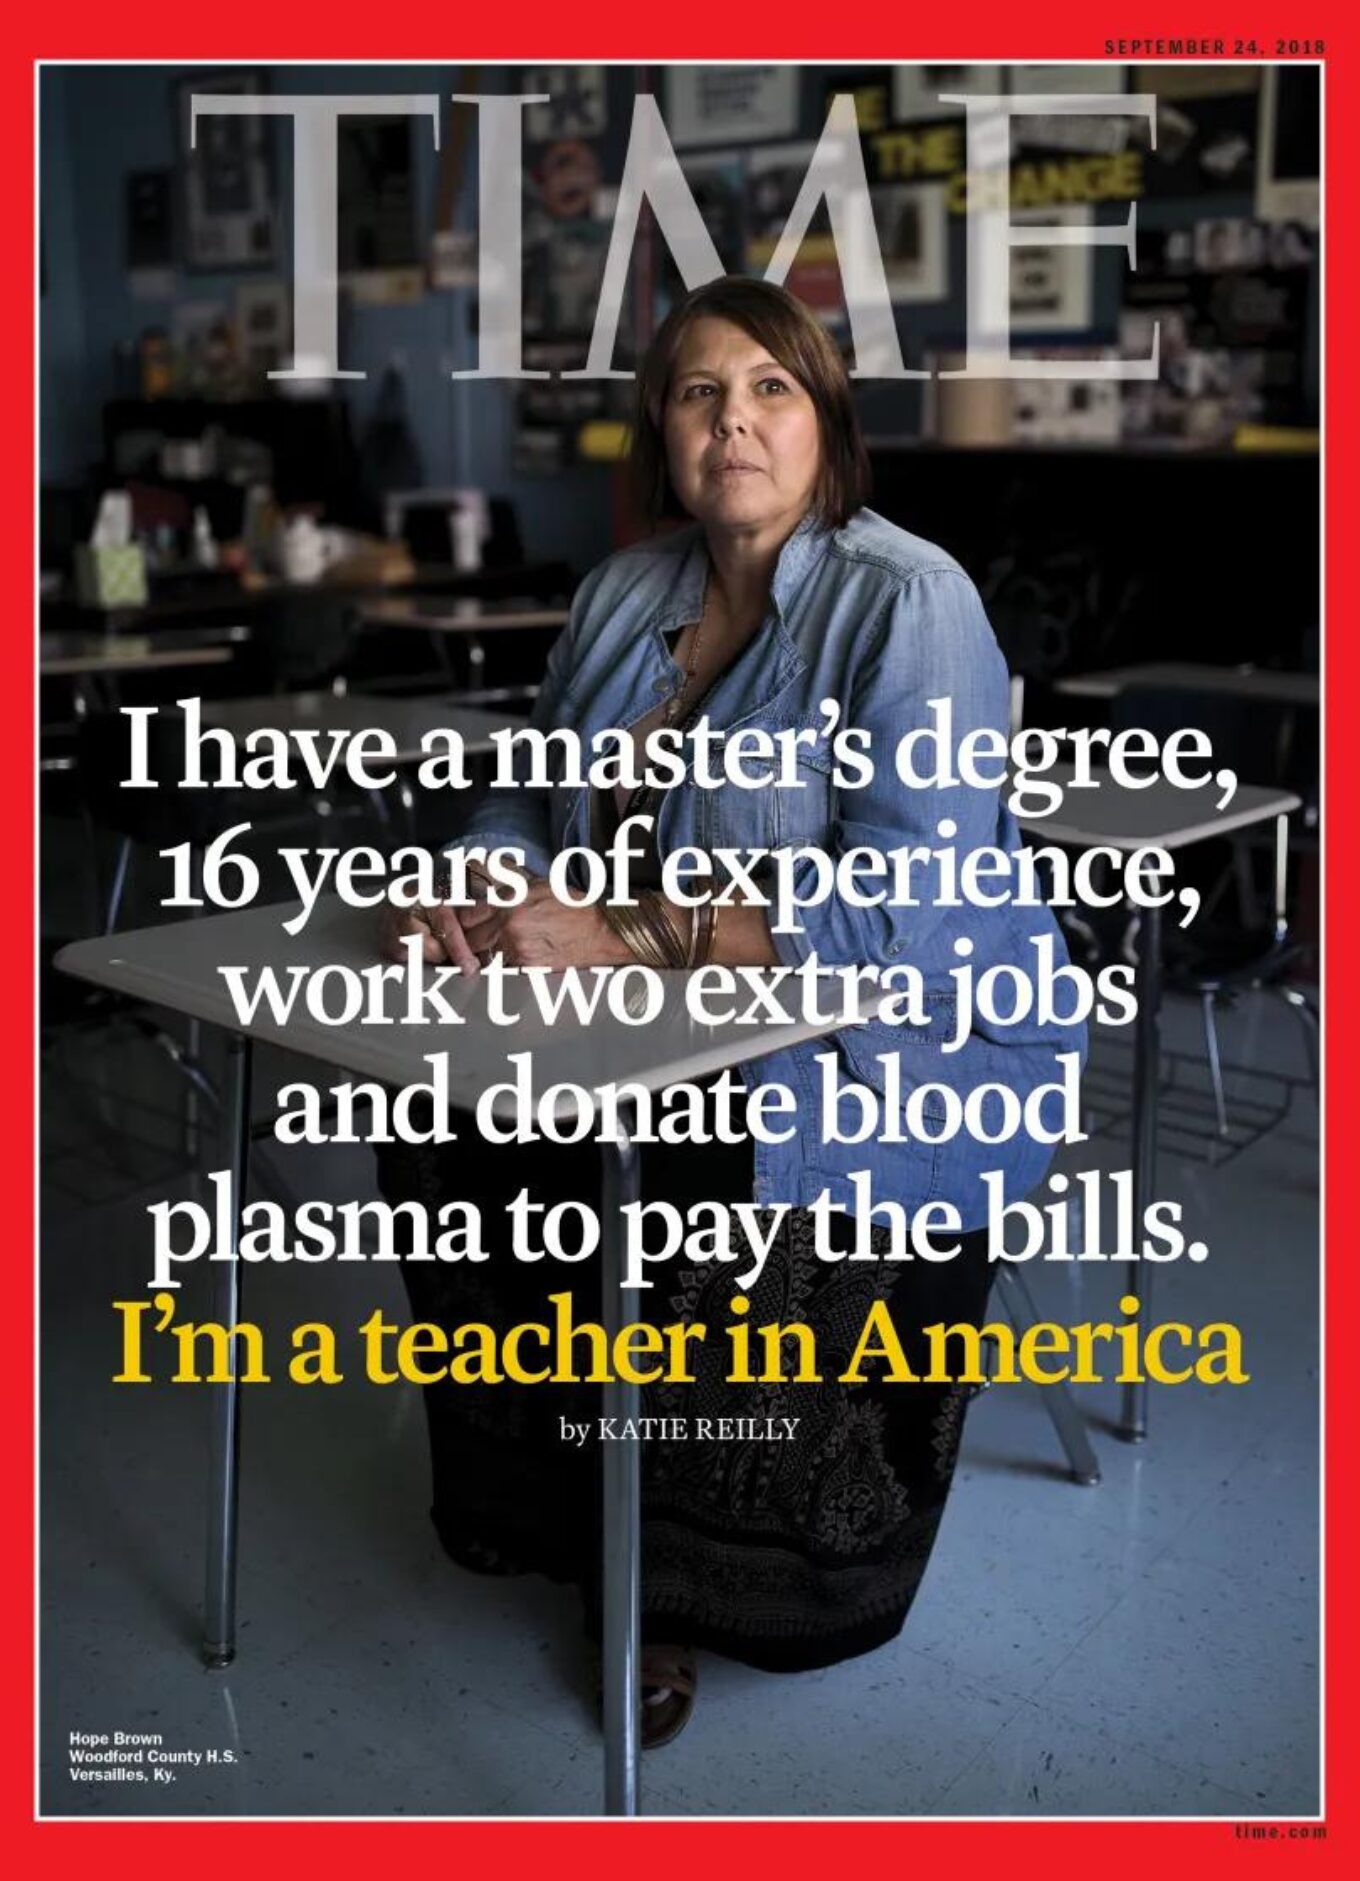 In a clear example of why teachers quit, this photo shows the cover of Time Magazine. A white woman sits in a classroom. Text is shown over the photo that reads, "I have a master's degree, 16 years of experience, work two extra jobs and donate blood plasma to pay the bills. I'm a teacher in America."